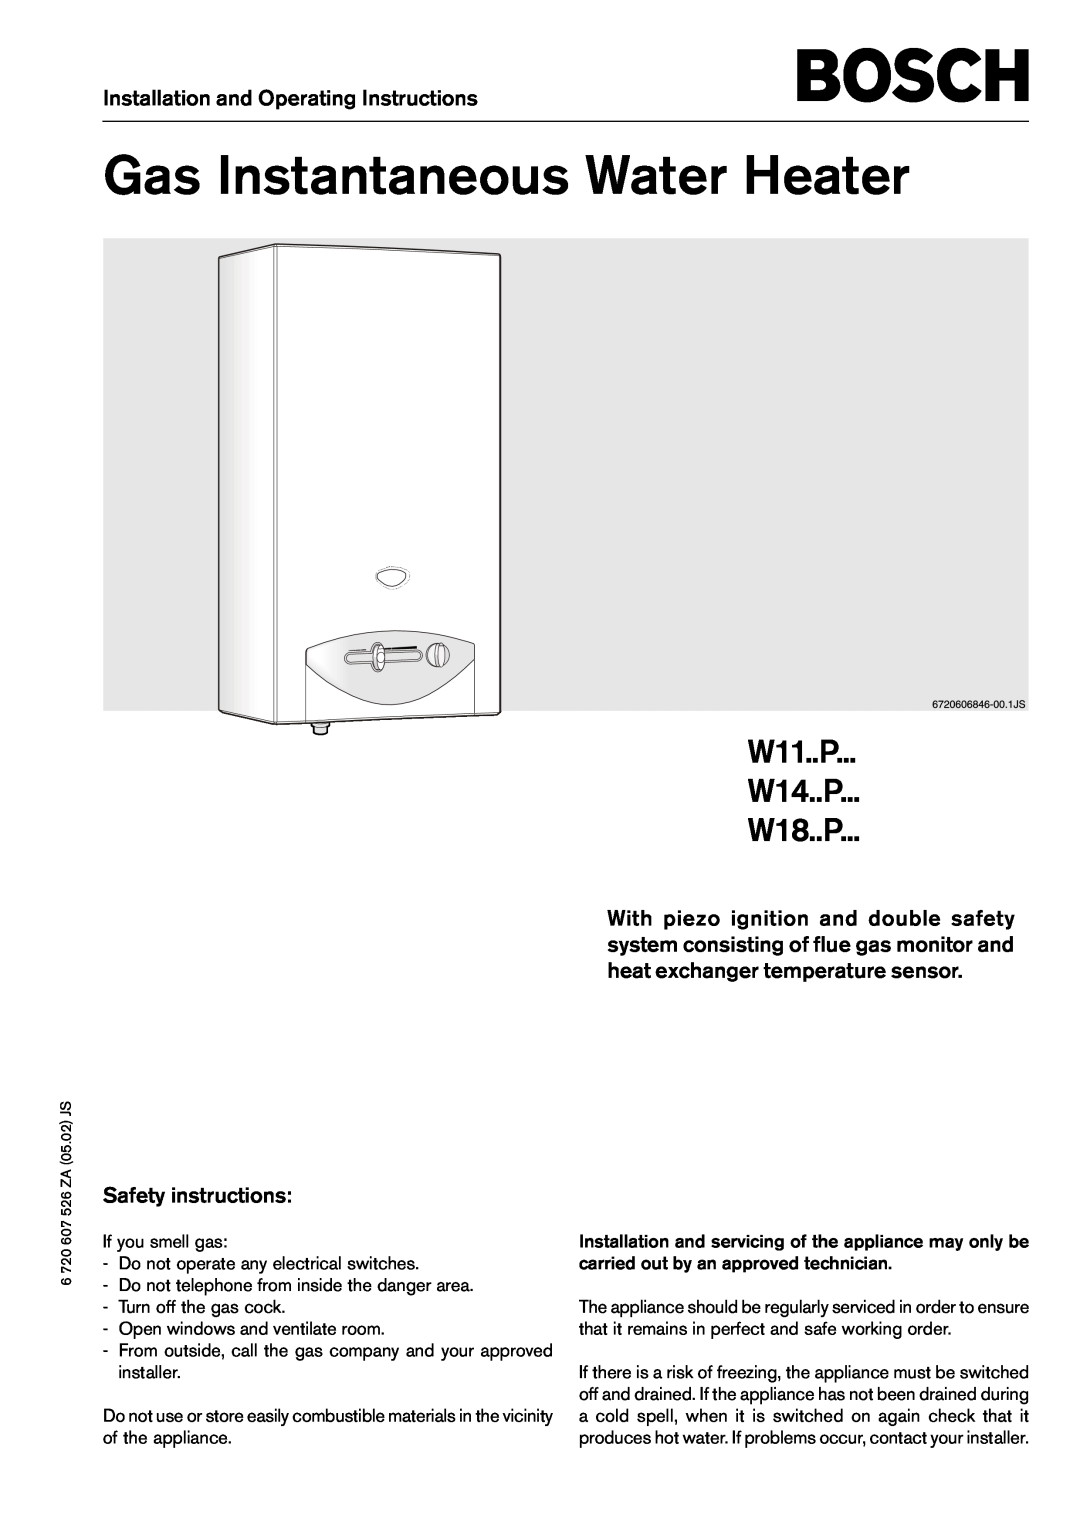 Bosch Appliances W11P manual Installation and Operating Instructions, Safety instructions, Gas Instantaneous Water Heater 